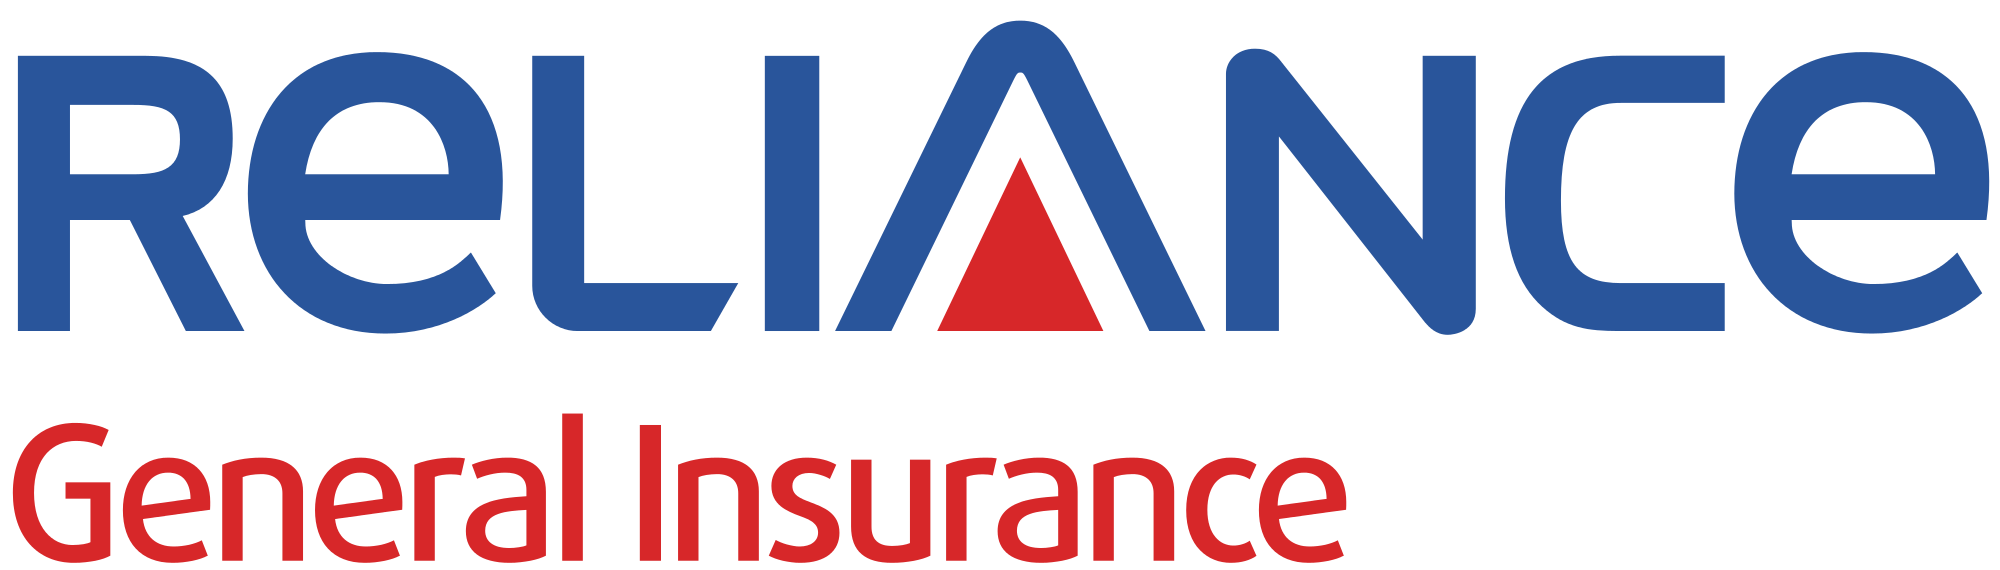 Reliance General Insurance Company Limited | Reliance Car Insurance